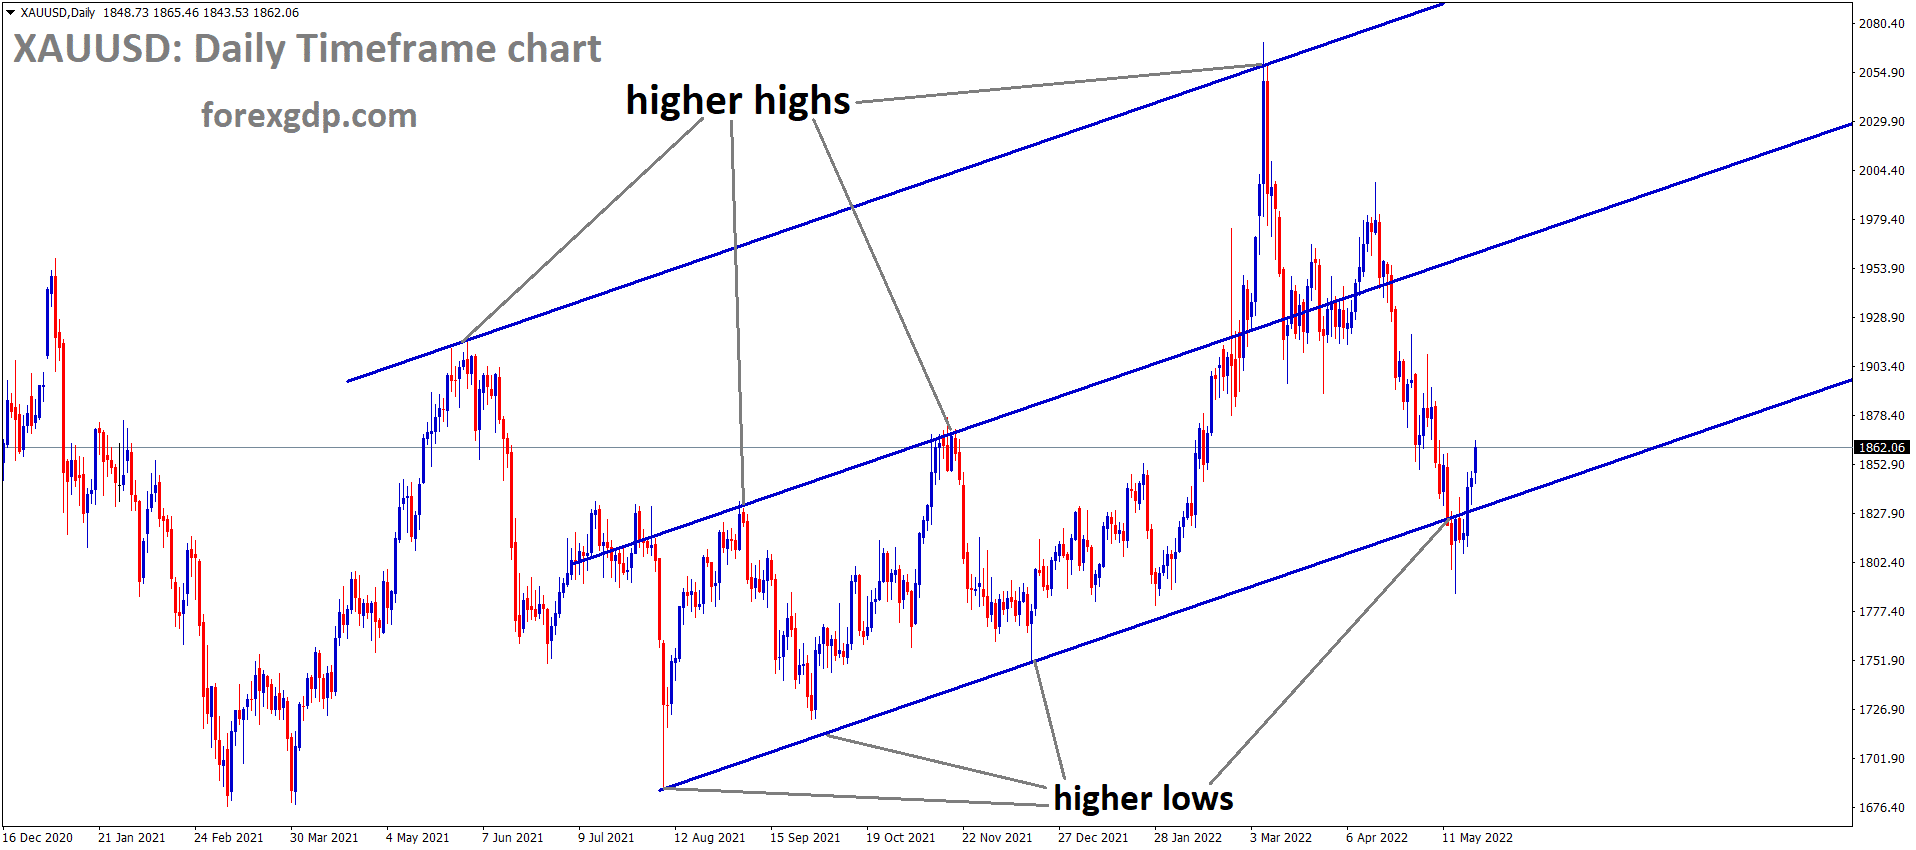 XAUUSD Daily Time Frame Analysis Market is moving in an Ascending channel and The market has rebounded from the higher low area of the channel